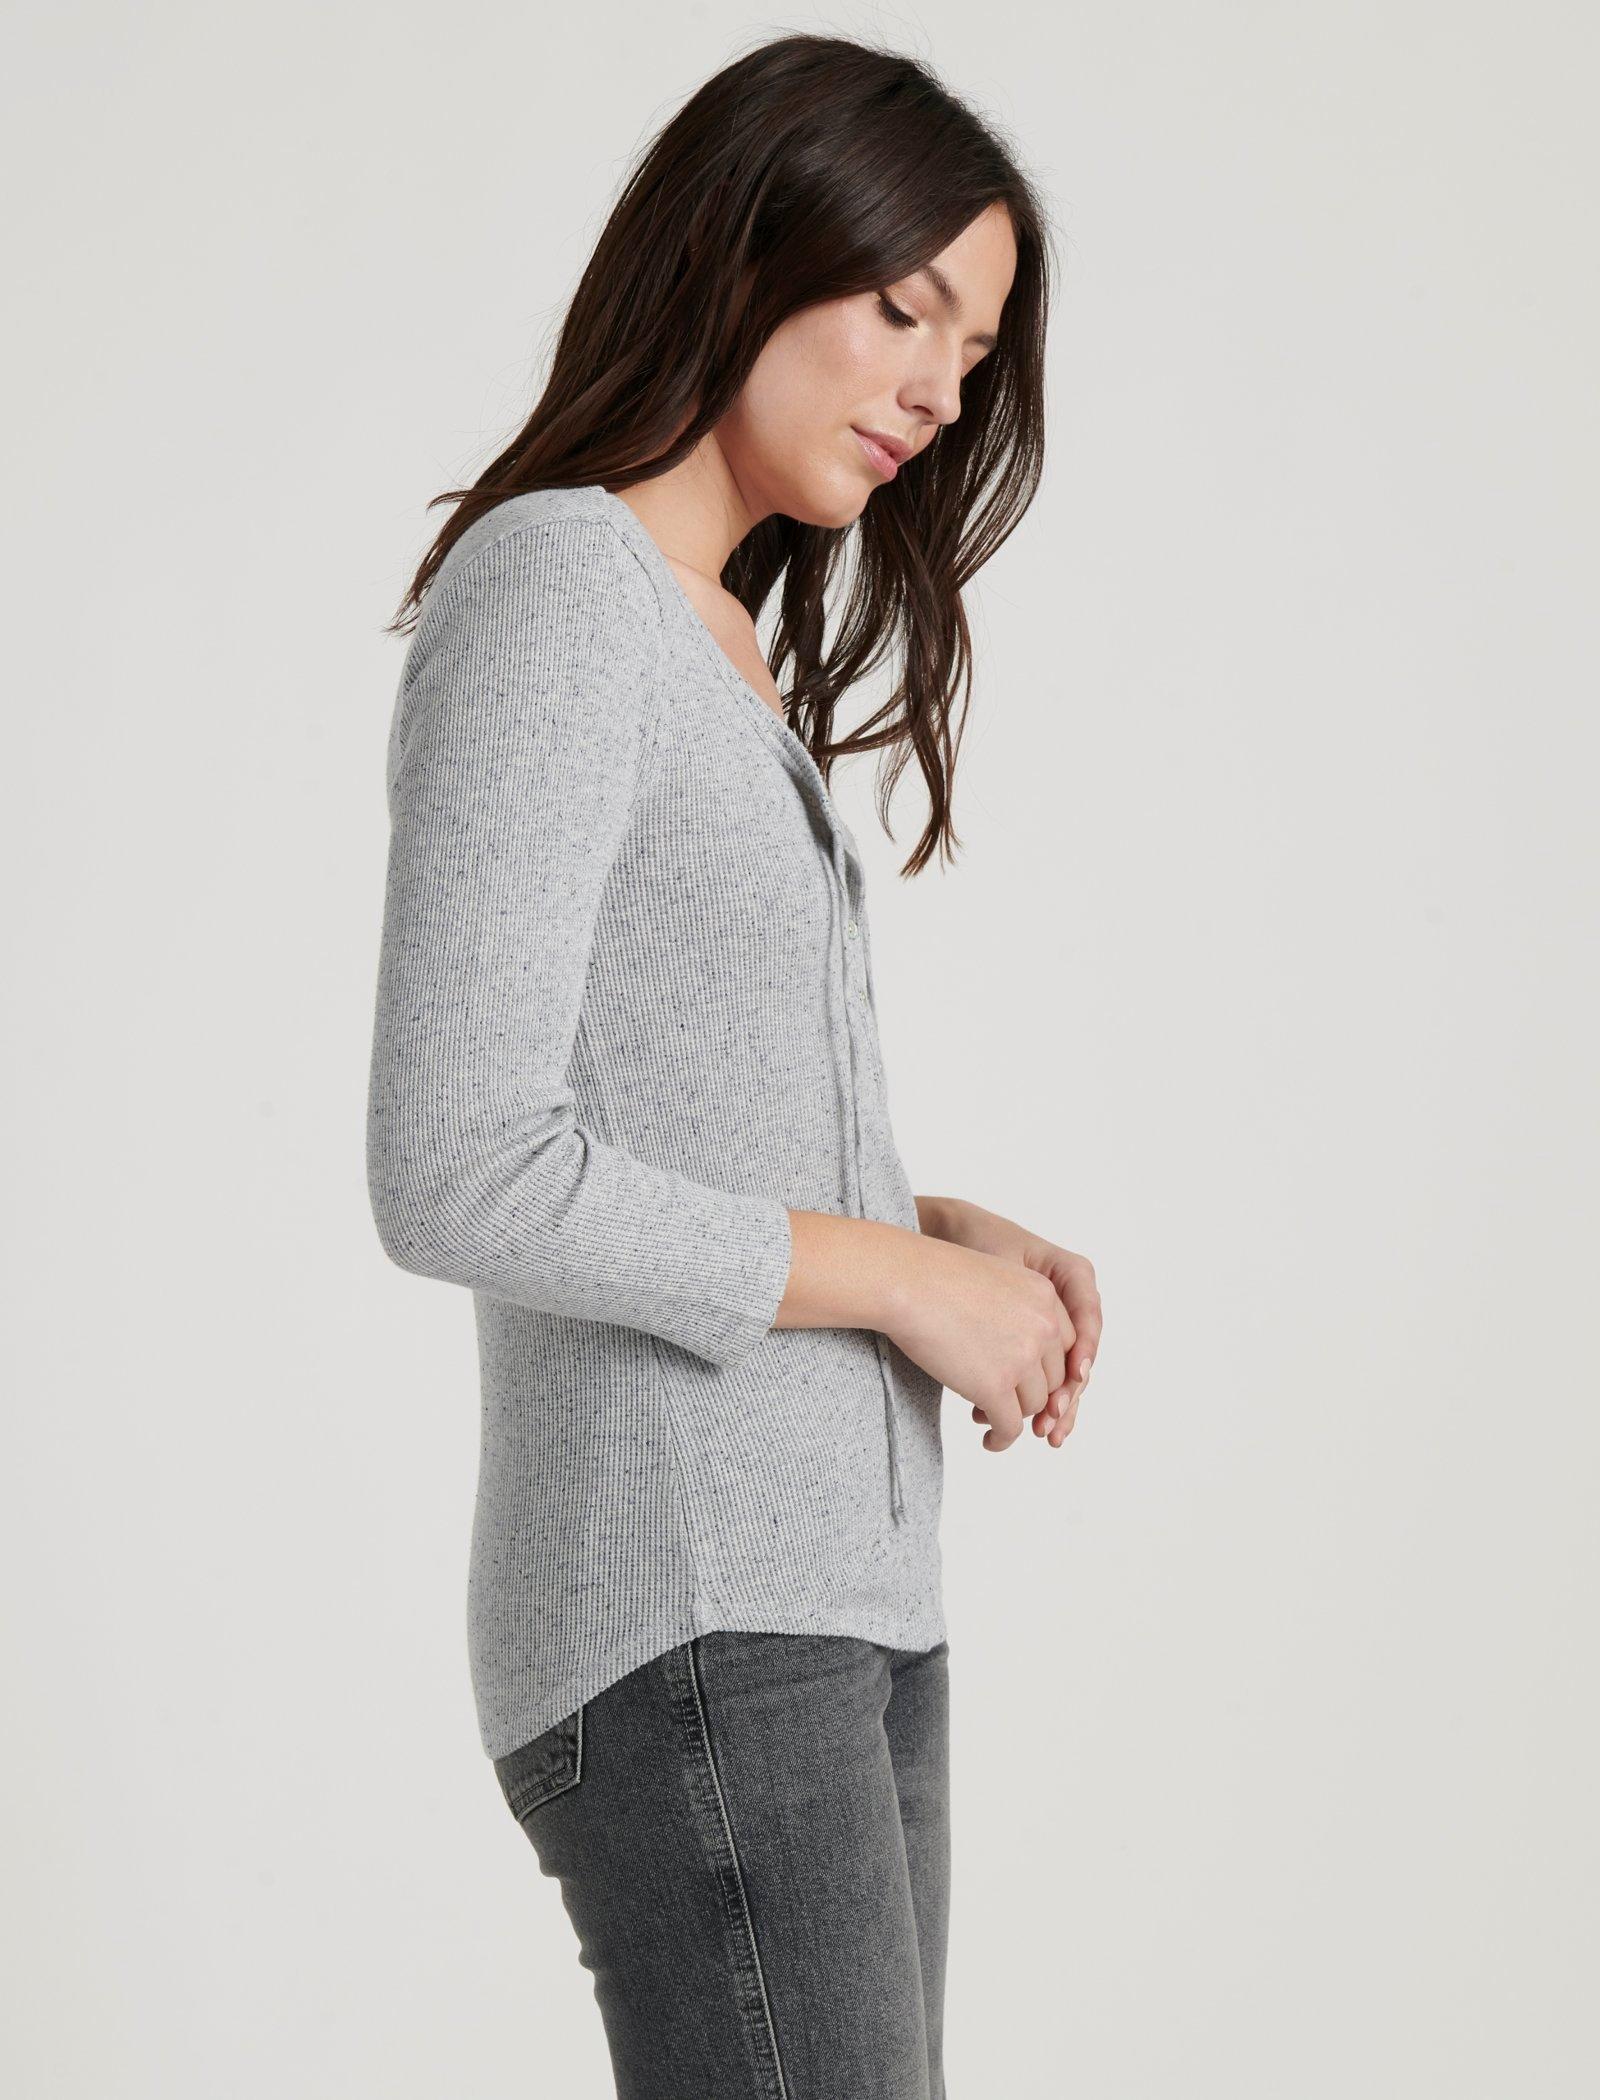 Buy Lucky Brand Women's Allover Embroidered Thermal Top Online at